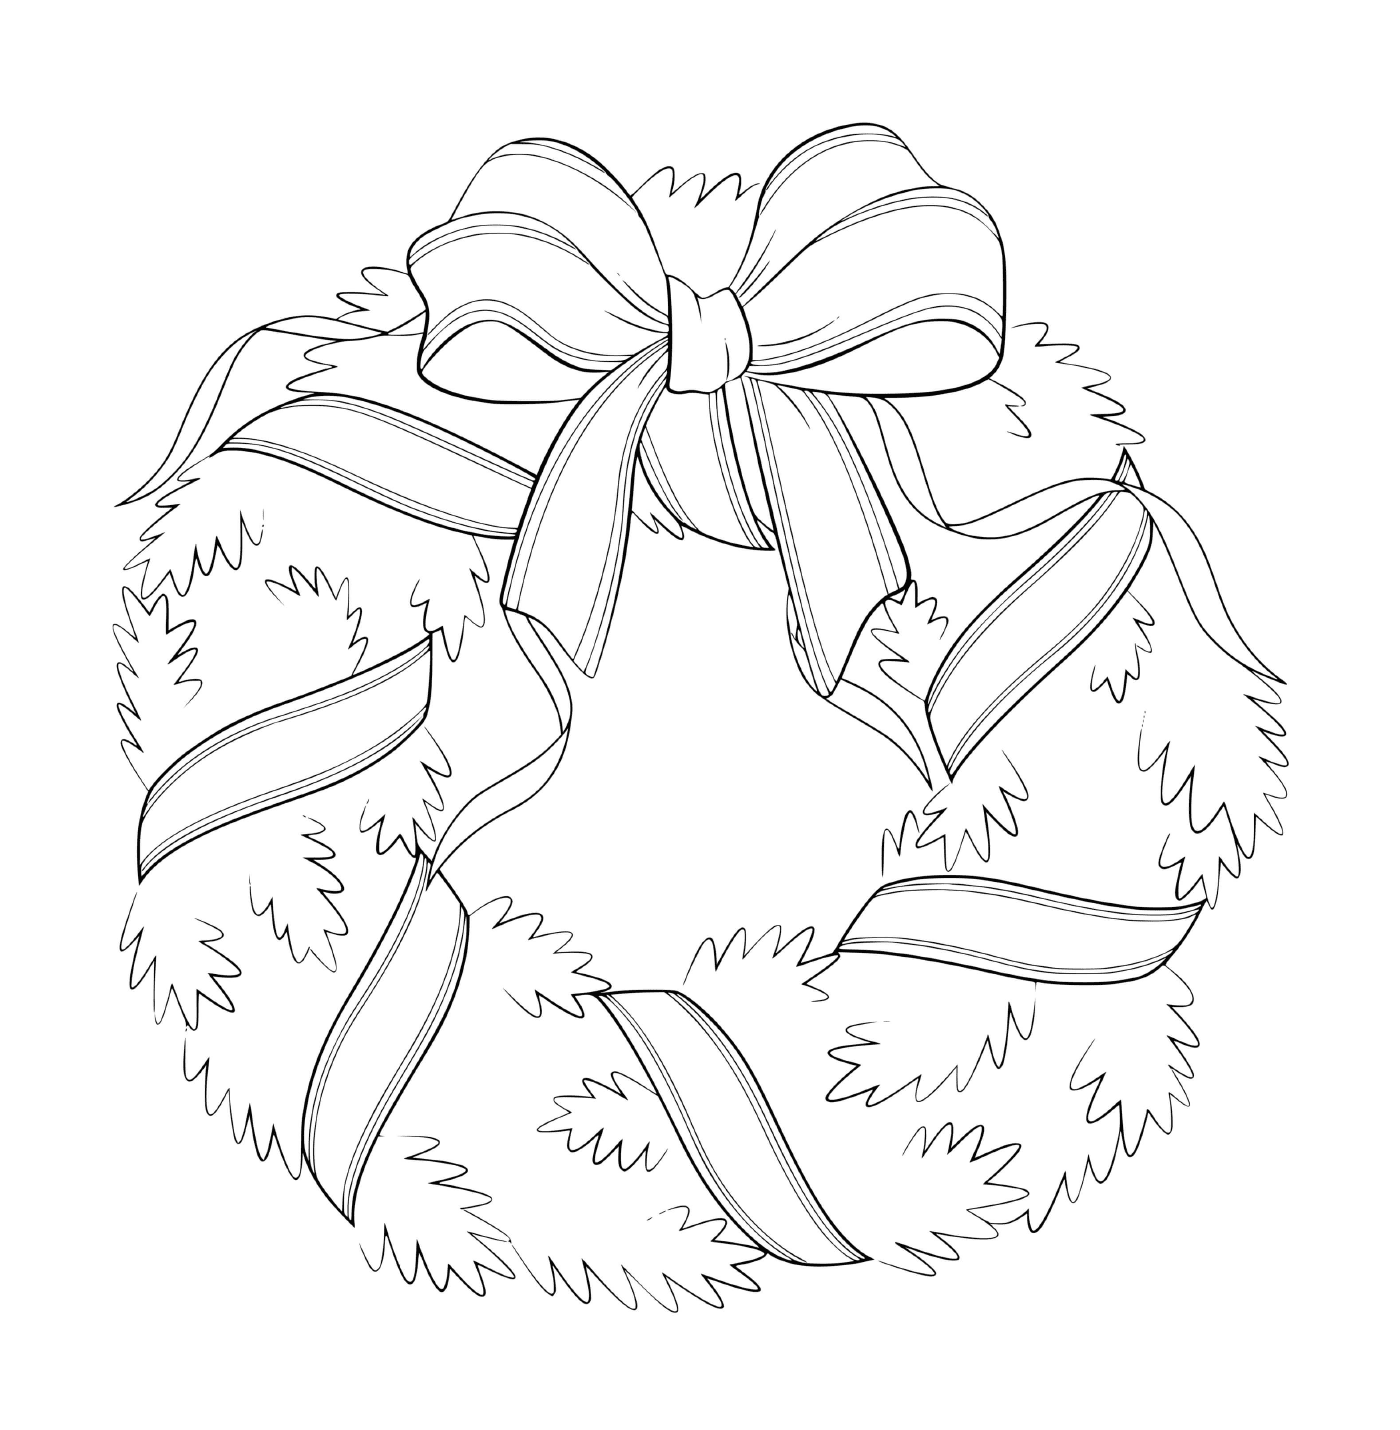  A Christmas wreath with a red knot 